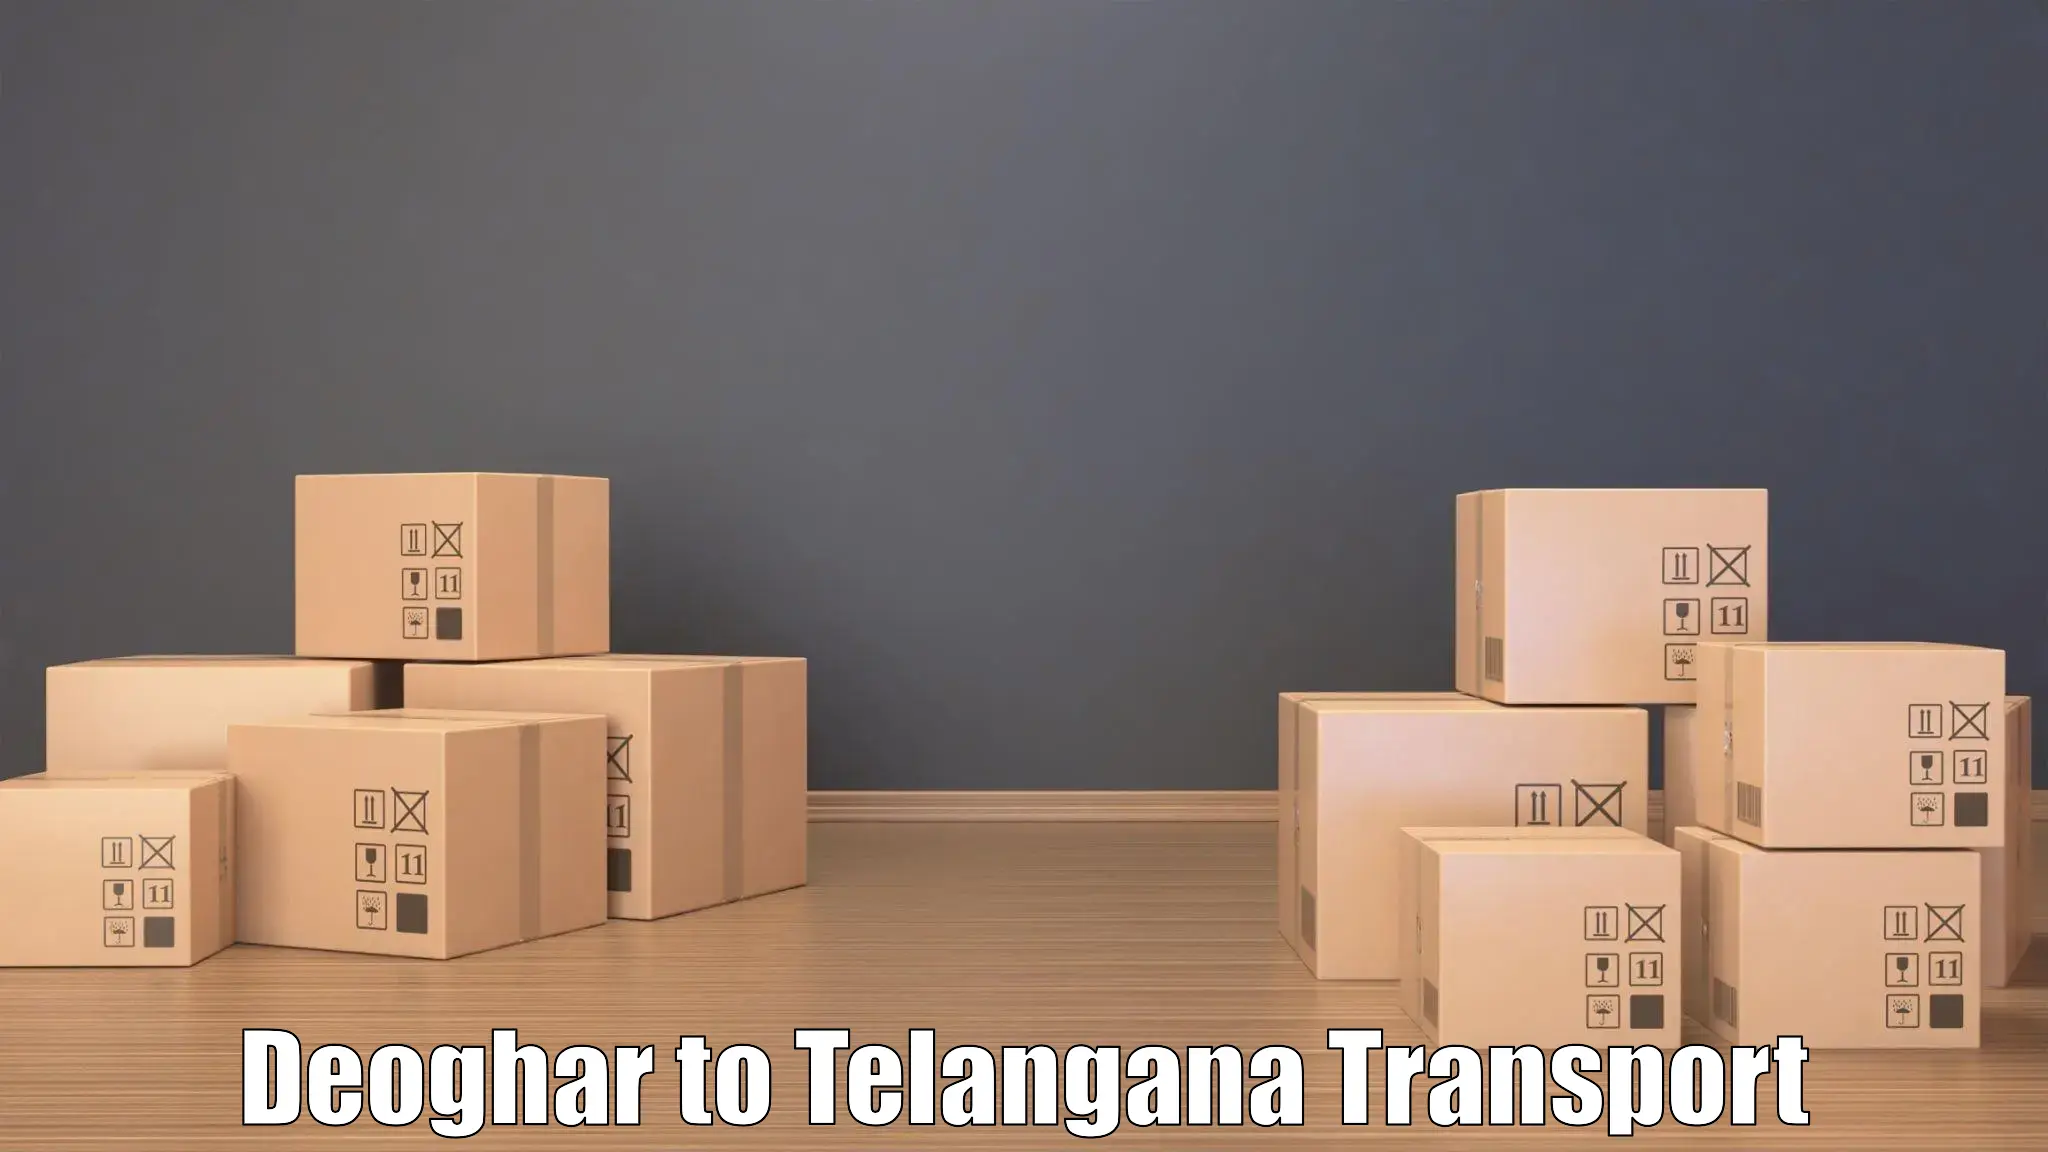 Truck transport companies in India Deoghar to Eligedu